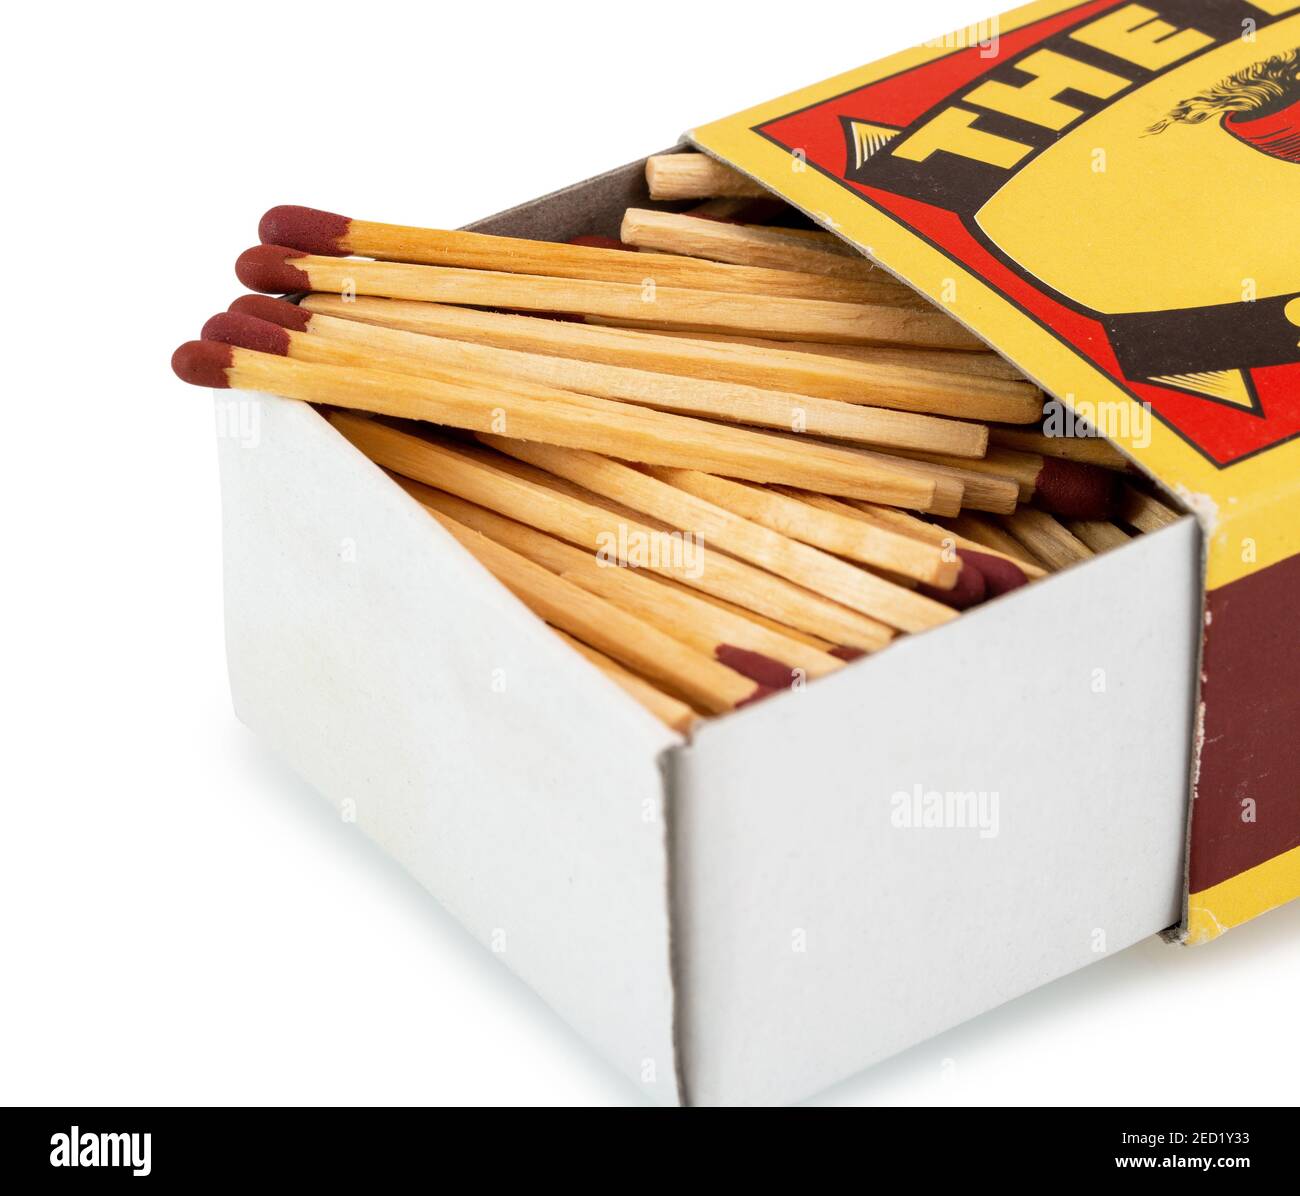 Vintage cardboard matchbox with matches isolated on white background with  clipping path. Matches in open match-box on white underlay - retro style  Stock Photo - Alamy